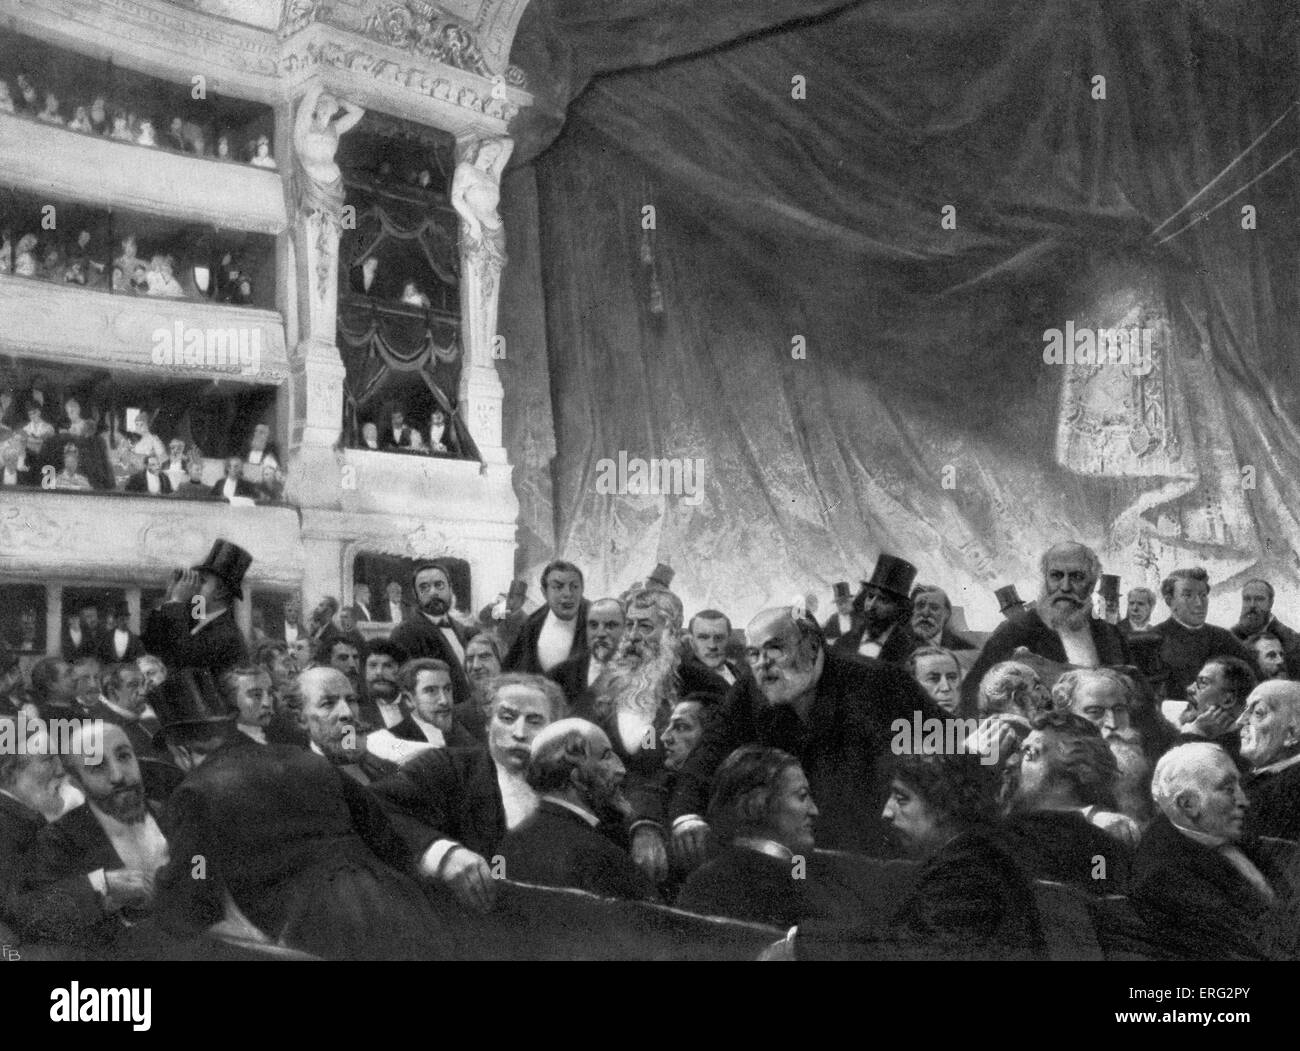 Interval at the Comedie Francaise. A group portrait of audience of 19th century literary and performing arts celebrities at the Paris theatre performance by Eduoard Dantan, French artist (1848 - 1897). Audience includes Emile Zola, Alphonse Daudet, Charles Gounod, Edmond de Goncourt, Jean Richepin, Ludovic Halevy, Alexandre Dumas fils, Victorien Sardou. Stock Photo